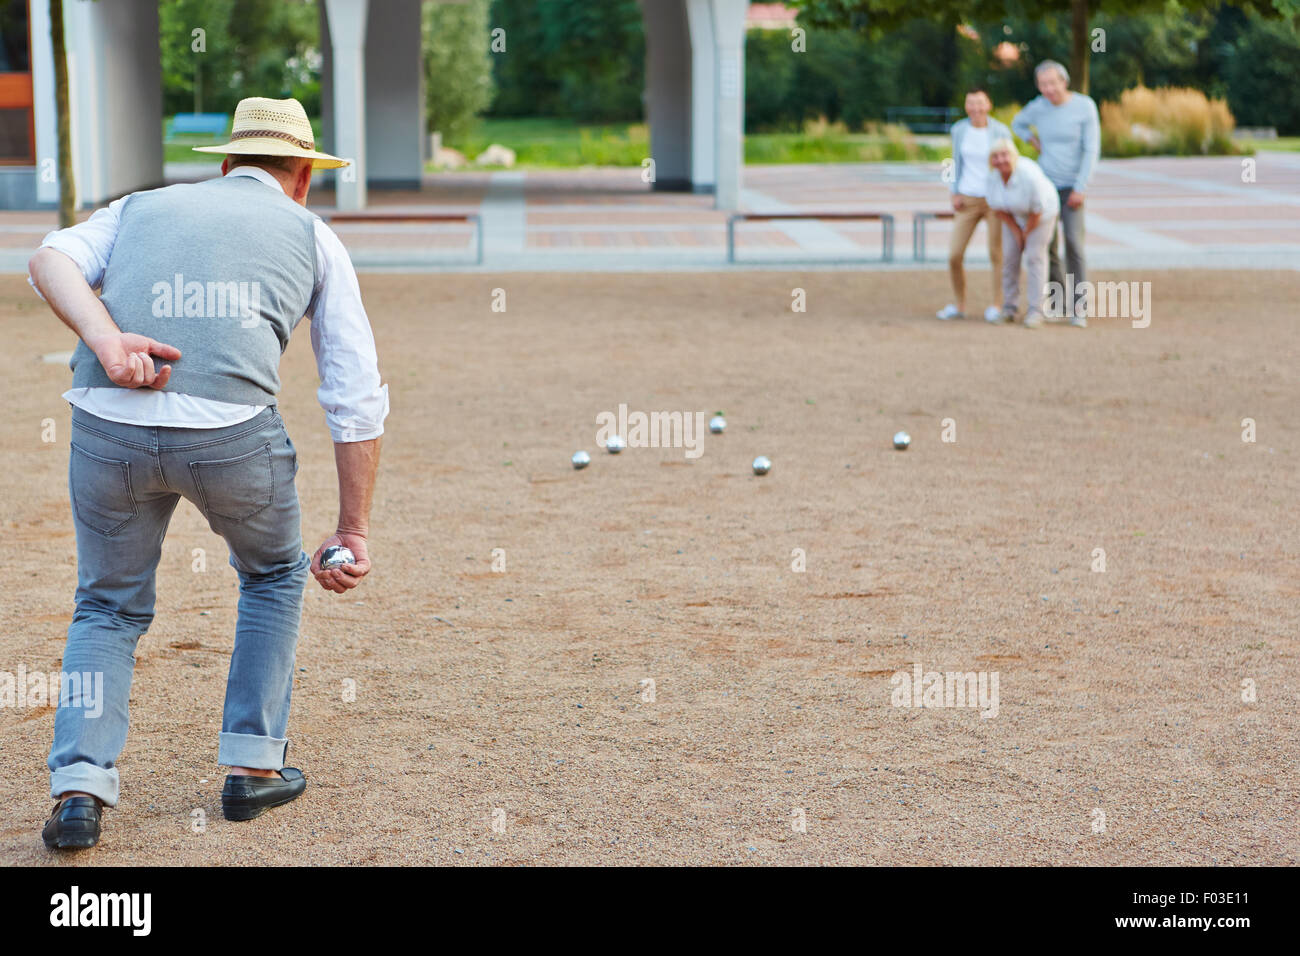 Senior group playing boule together in a city in front of a retirement hime Stock Photo